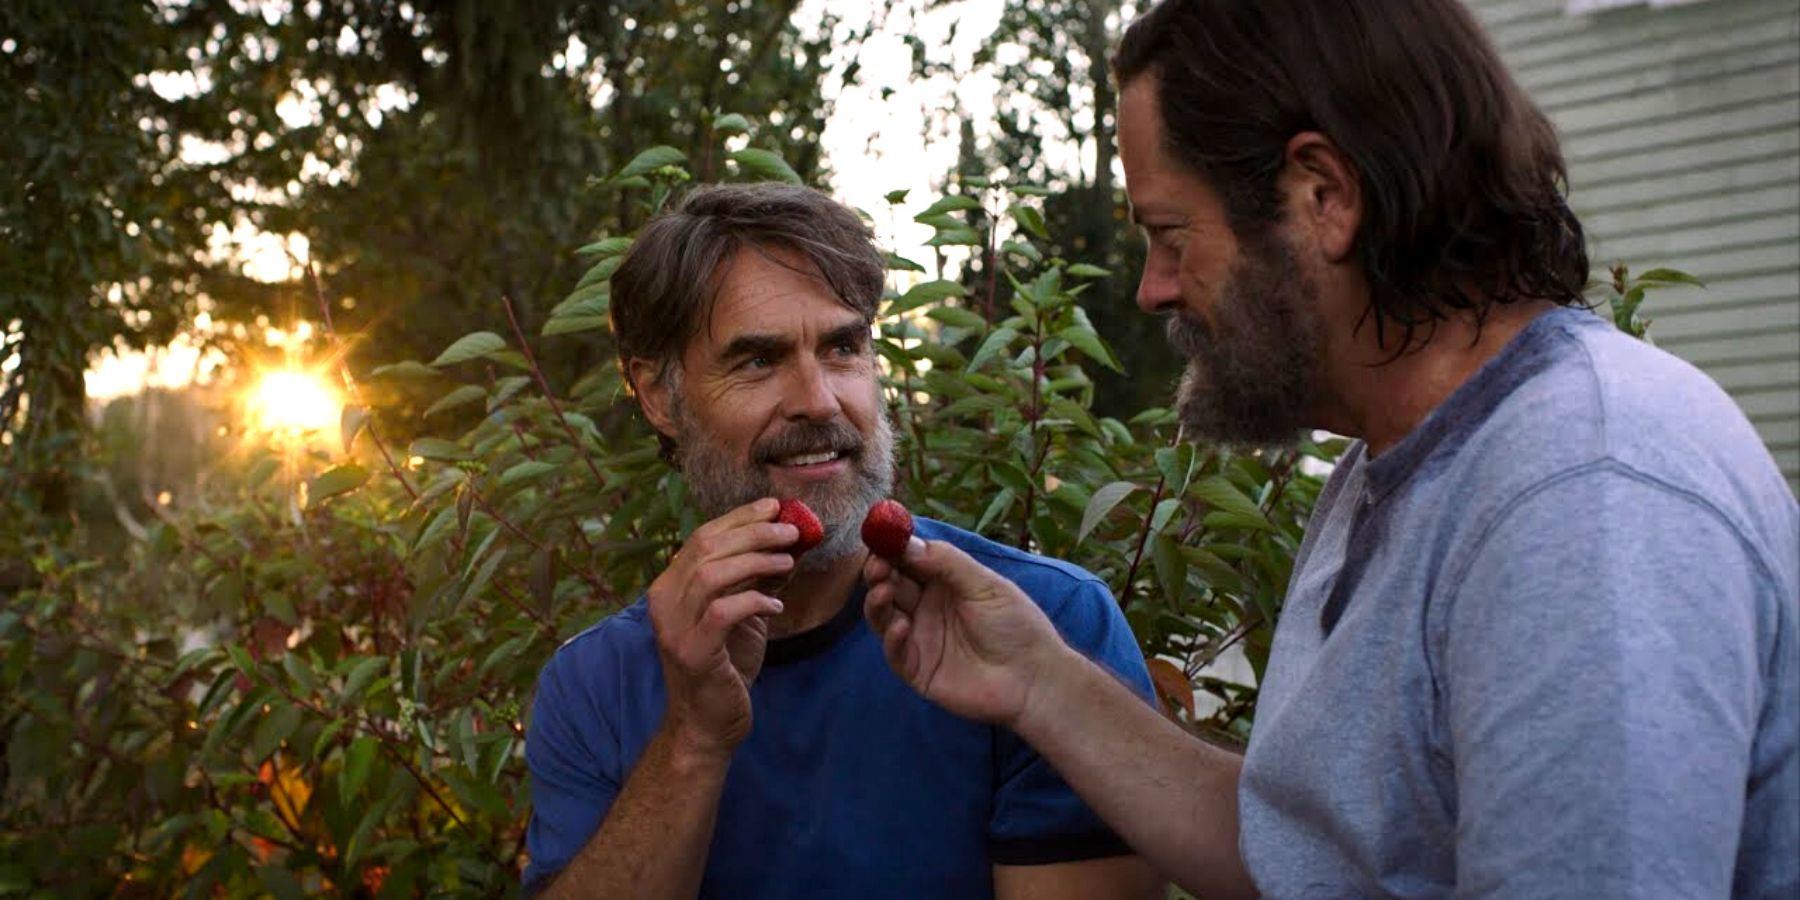 Nick Offerman and Murray Bartlett as Bill and Frank in the strawberry scene from The Last of Us episode 3